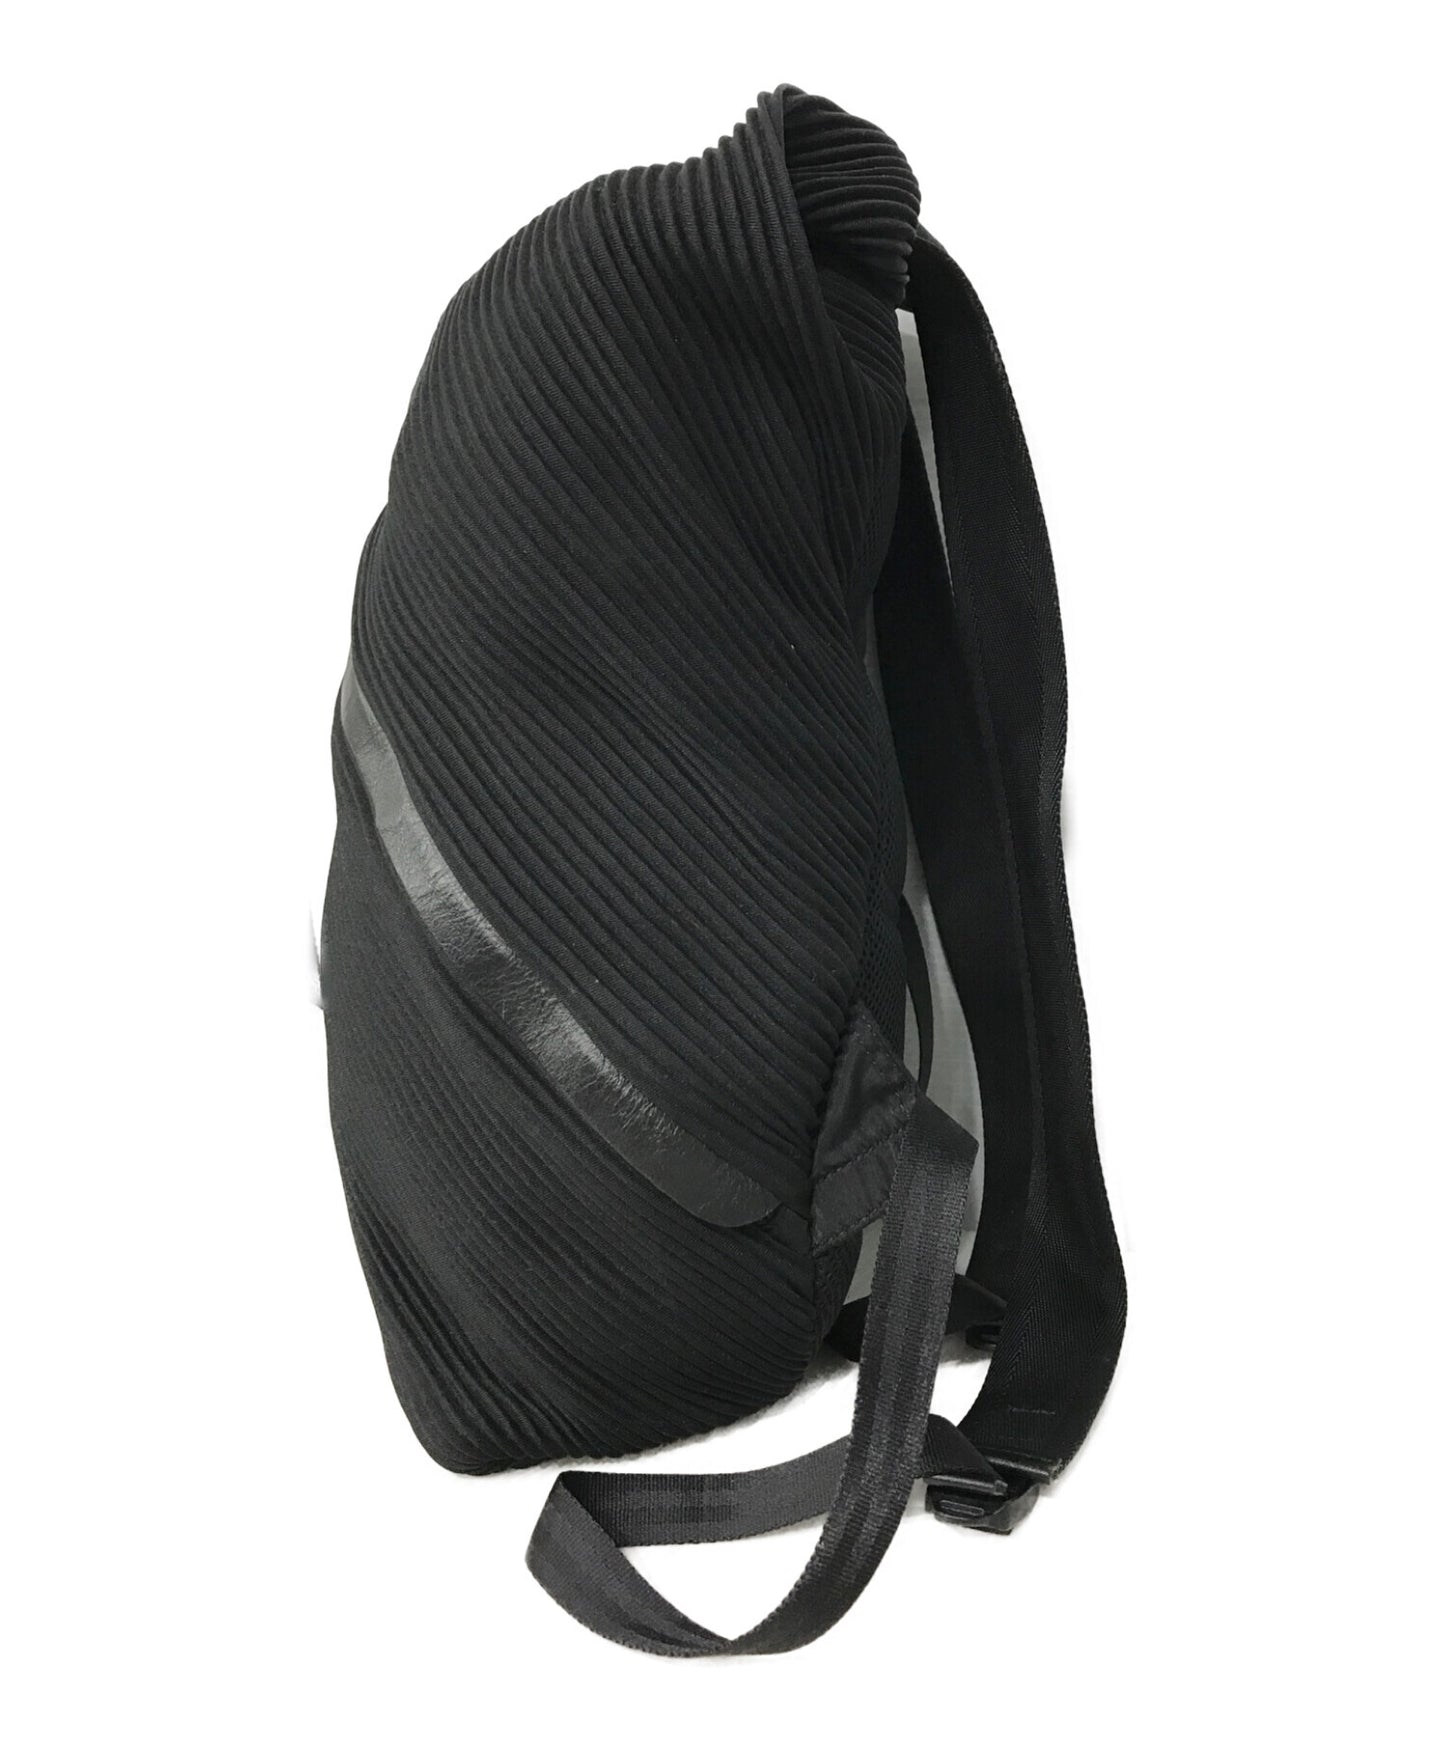 [Pre-owned] PLEATS PLEASE Pleated backpack PP92-AG501